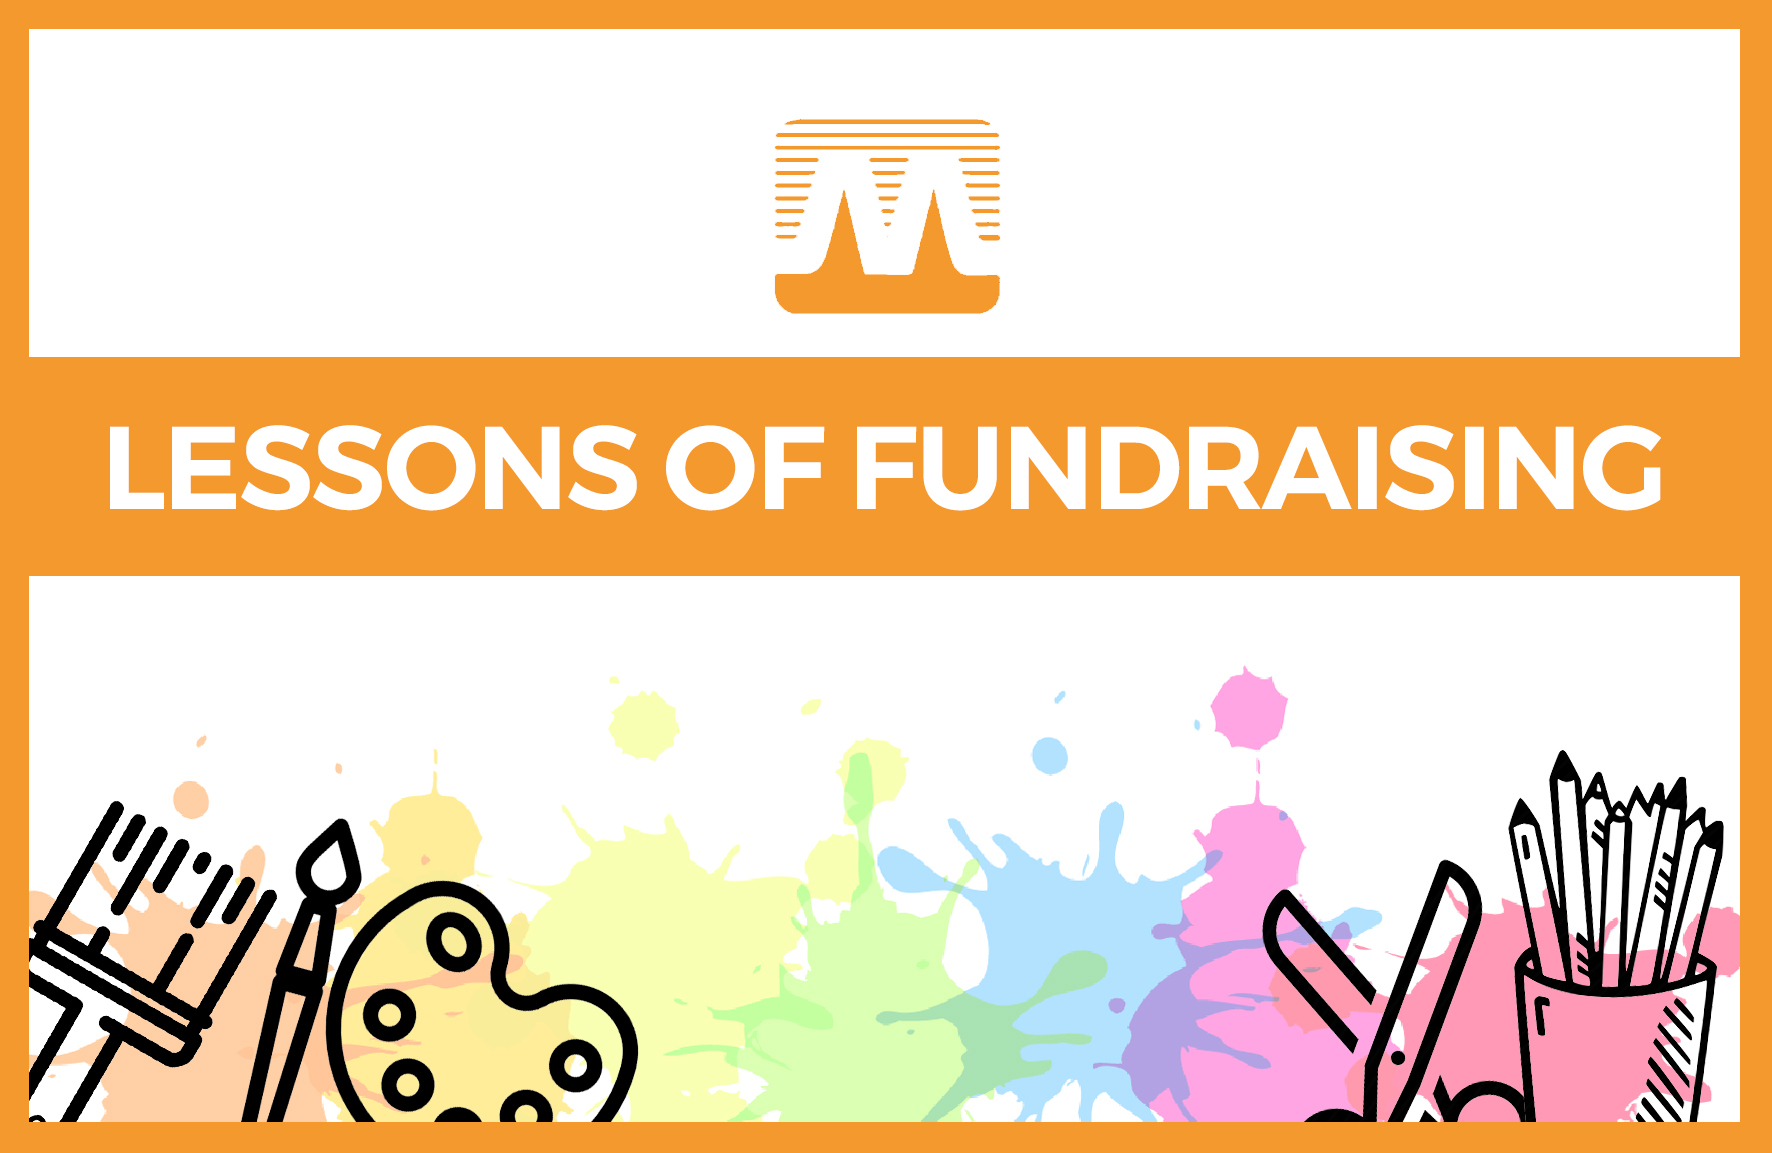 Lessons of fundraising with melamine plate printing blog image